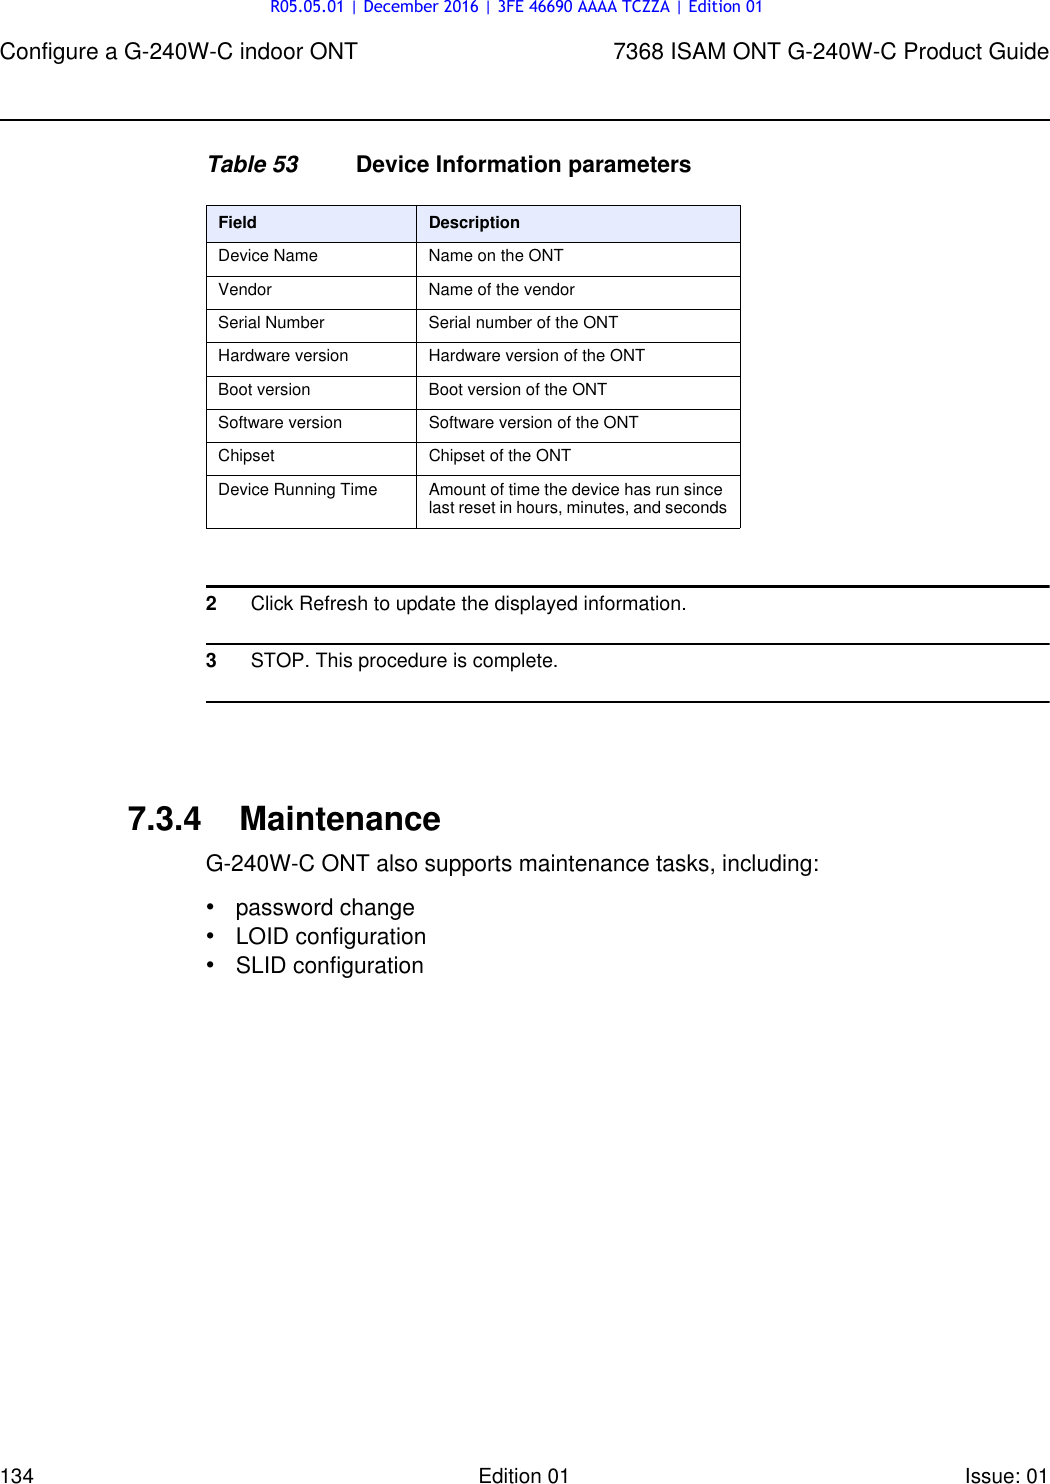 Page 134 of Nokia Bell G240W-C GPON ONU User Manual 7368 ISAM ONT G 240W B Product Guide